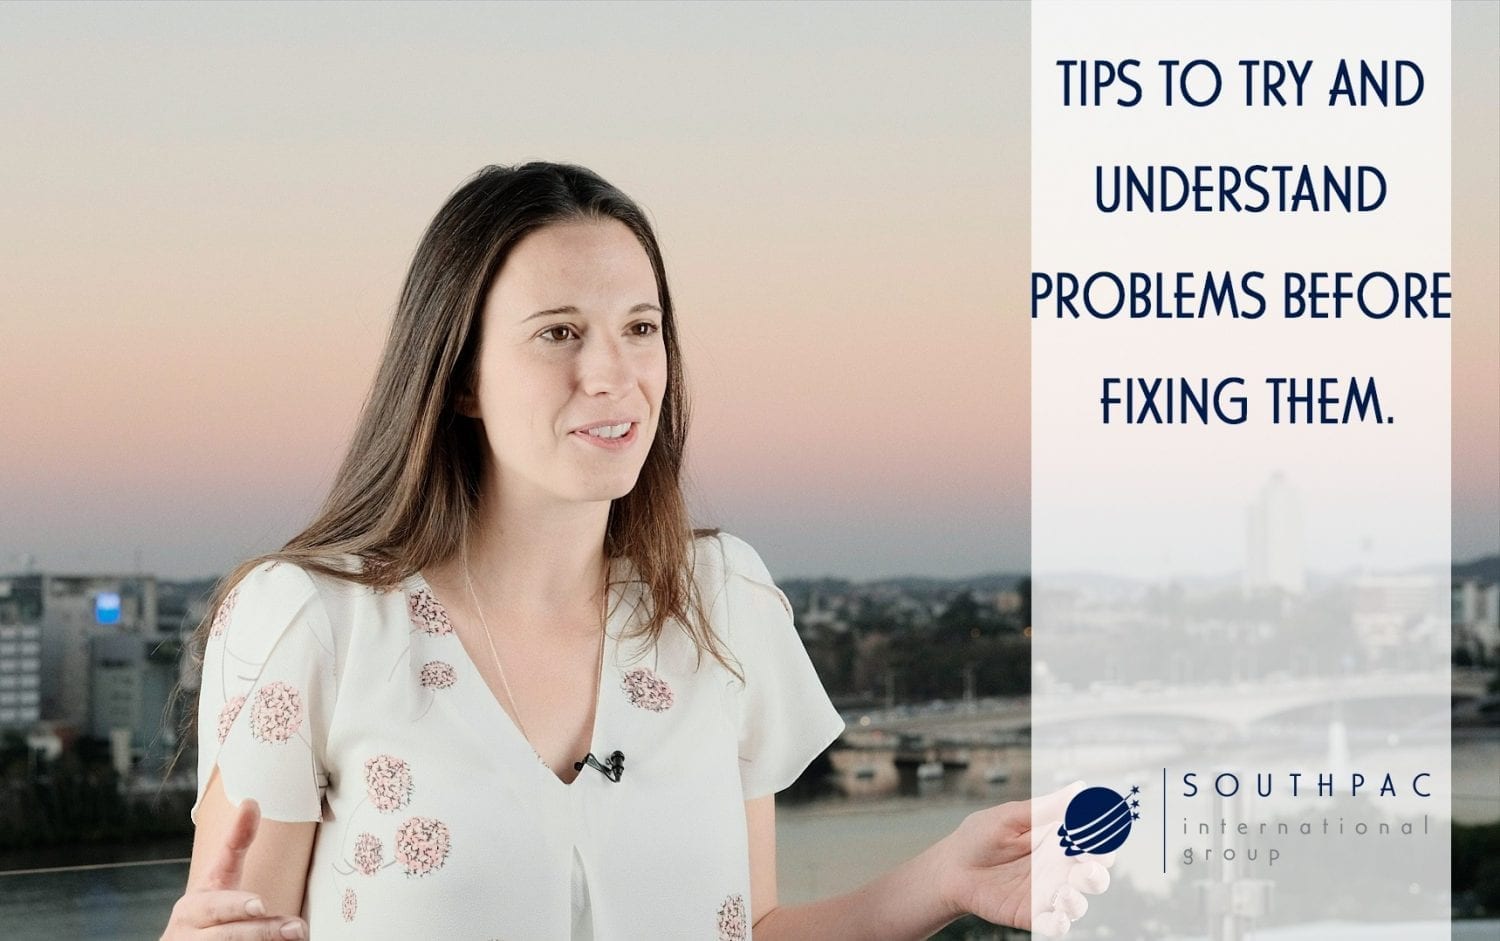 Andrea Baker, HOP Collaborator, shares her thoughts on "Tips to try and understand problems before fixing them?"